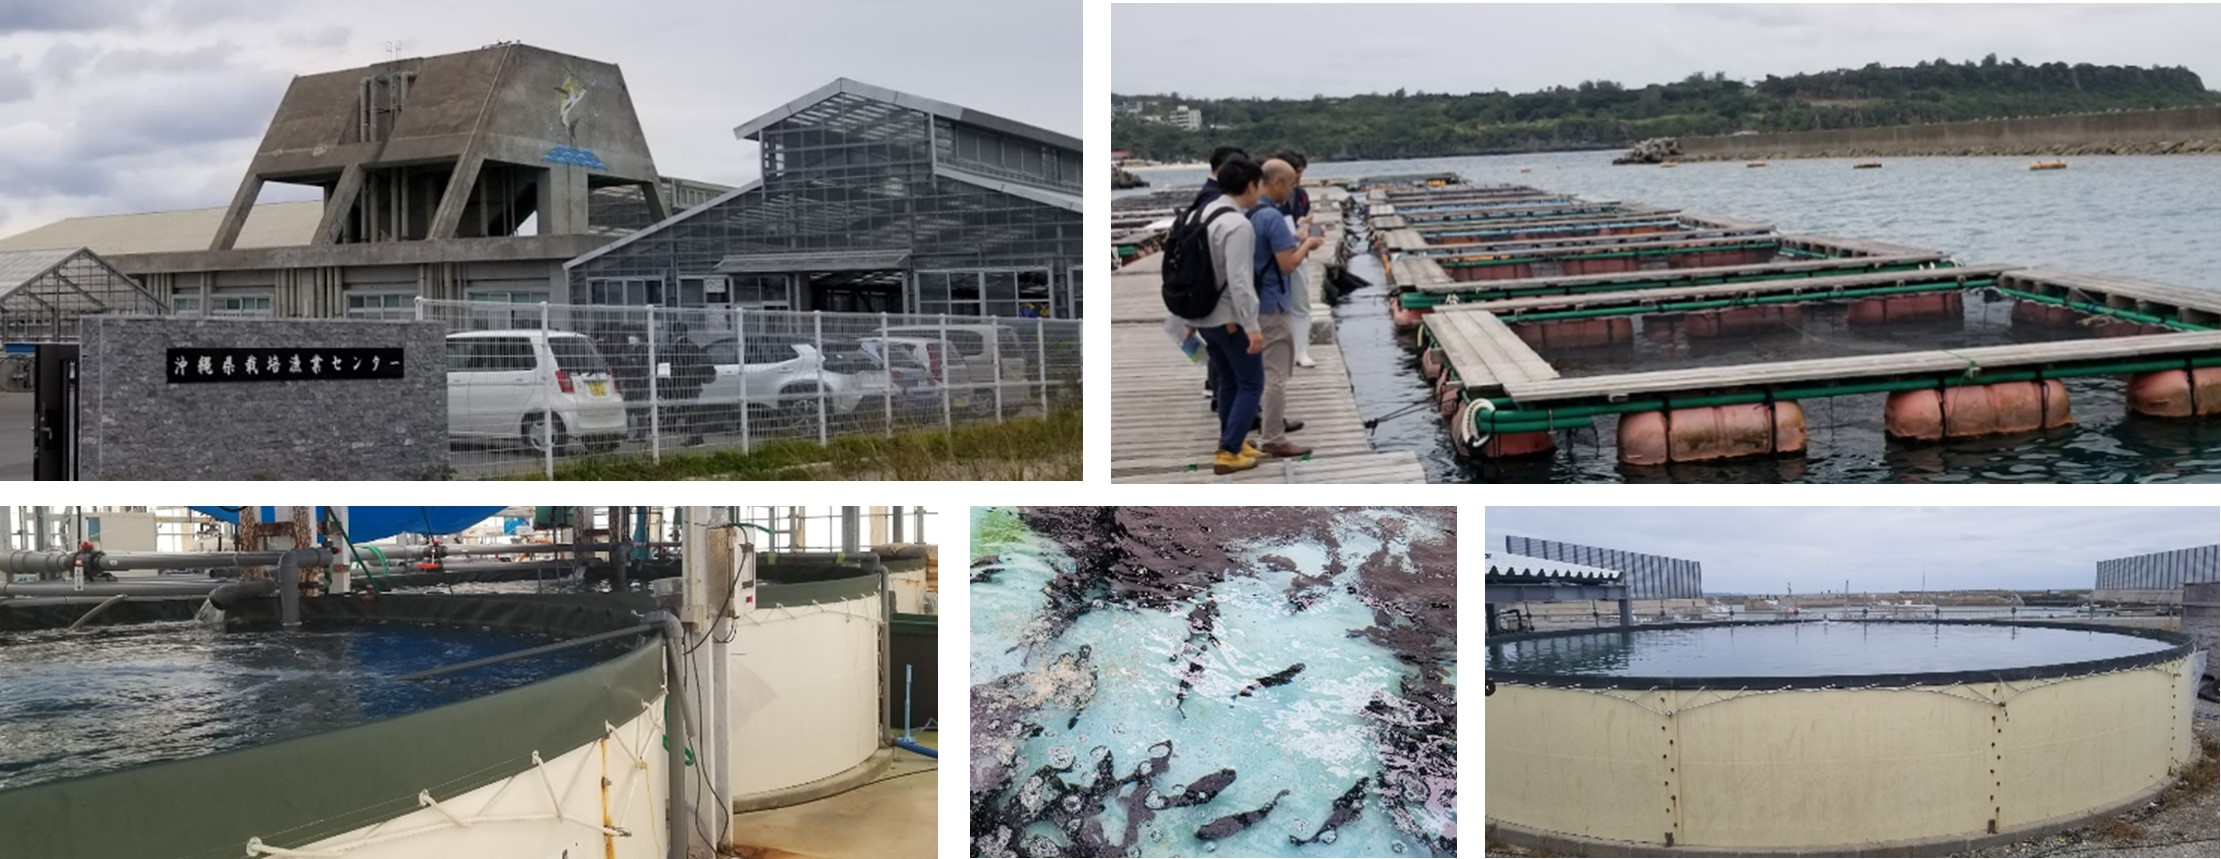 Field visit to Sustainable Land-based Aquaculture